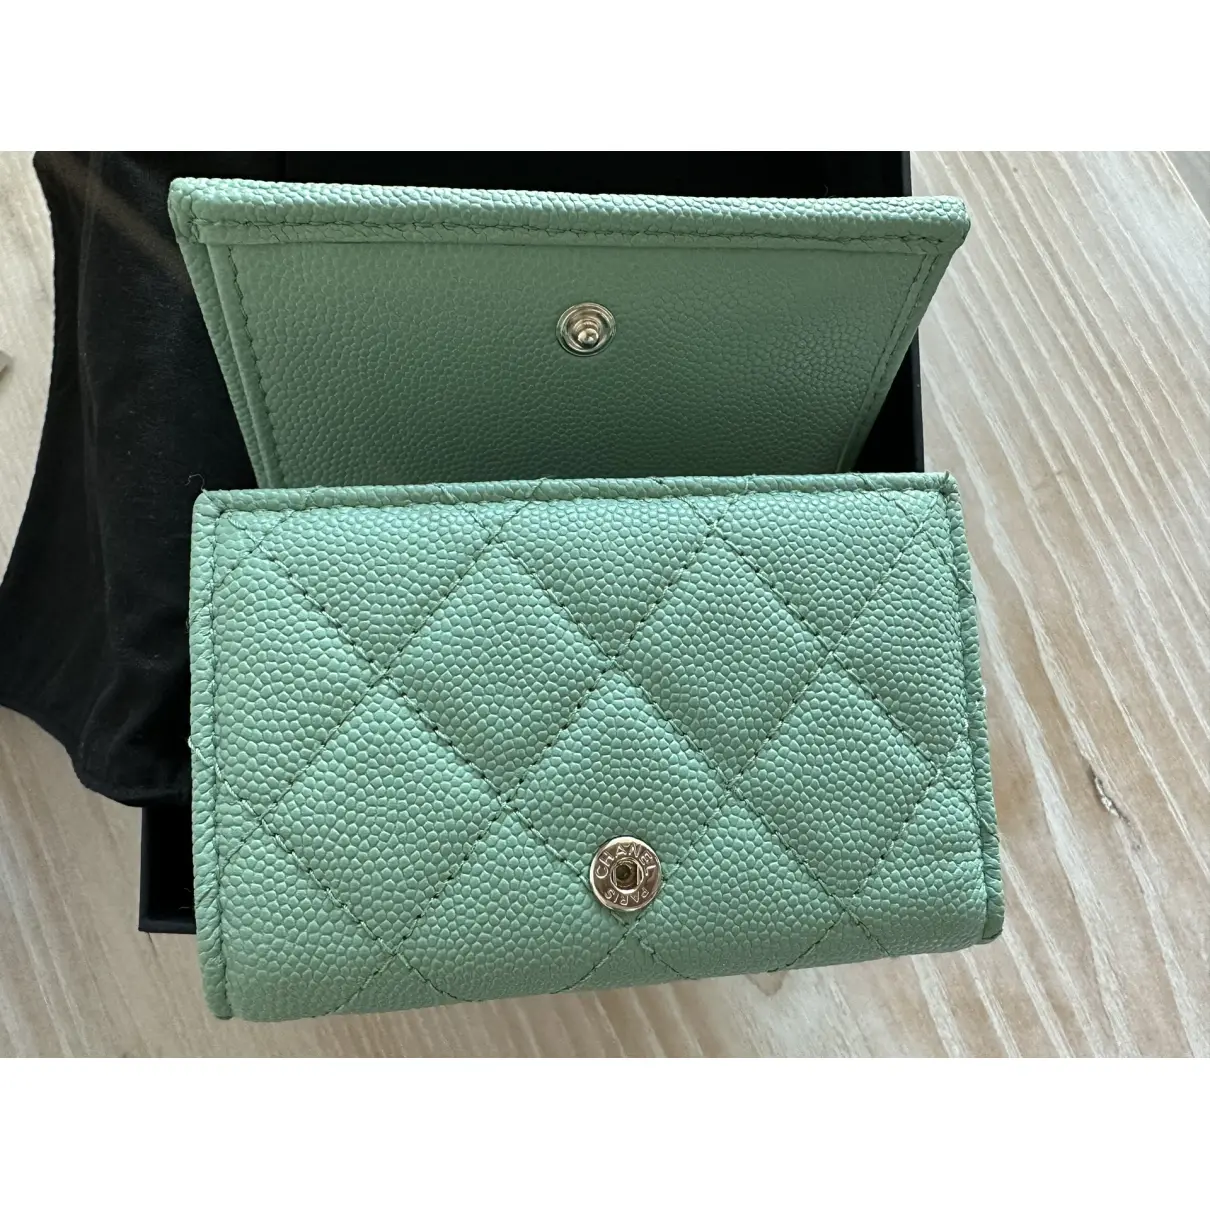 Timeless/classique leather wallet Chanel Green in Leather - 39044106